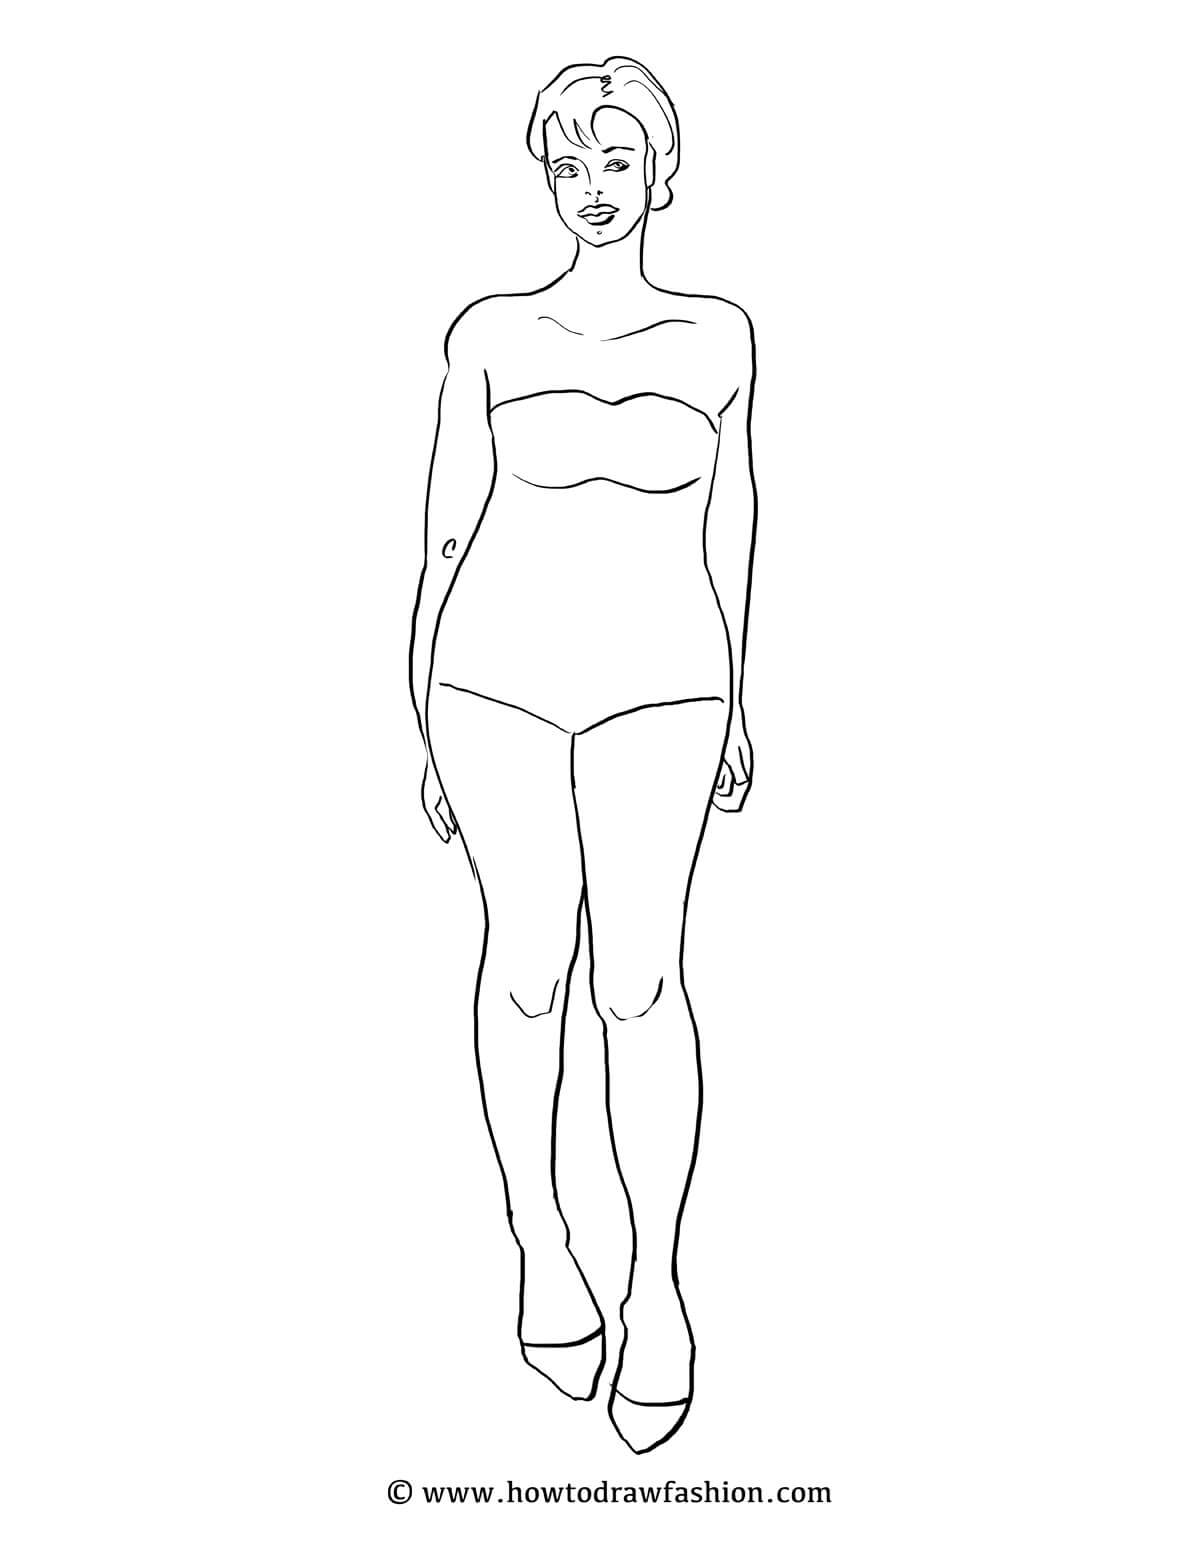 Human Body Drawing Template At Getdrawings | Free For With Blank Model Sketch Template